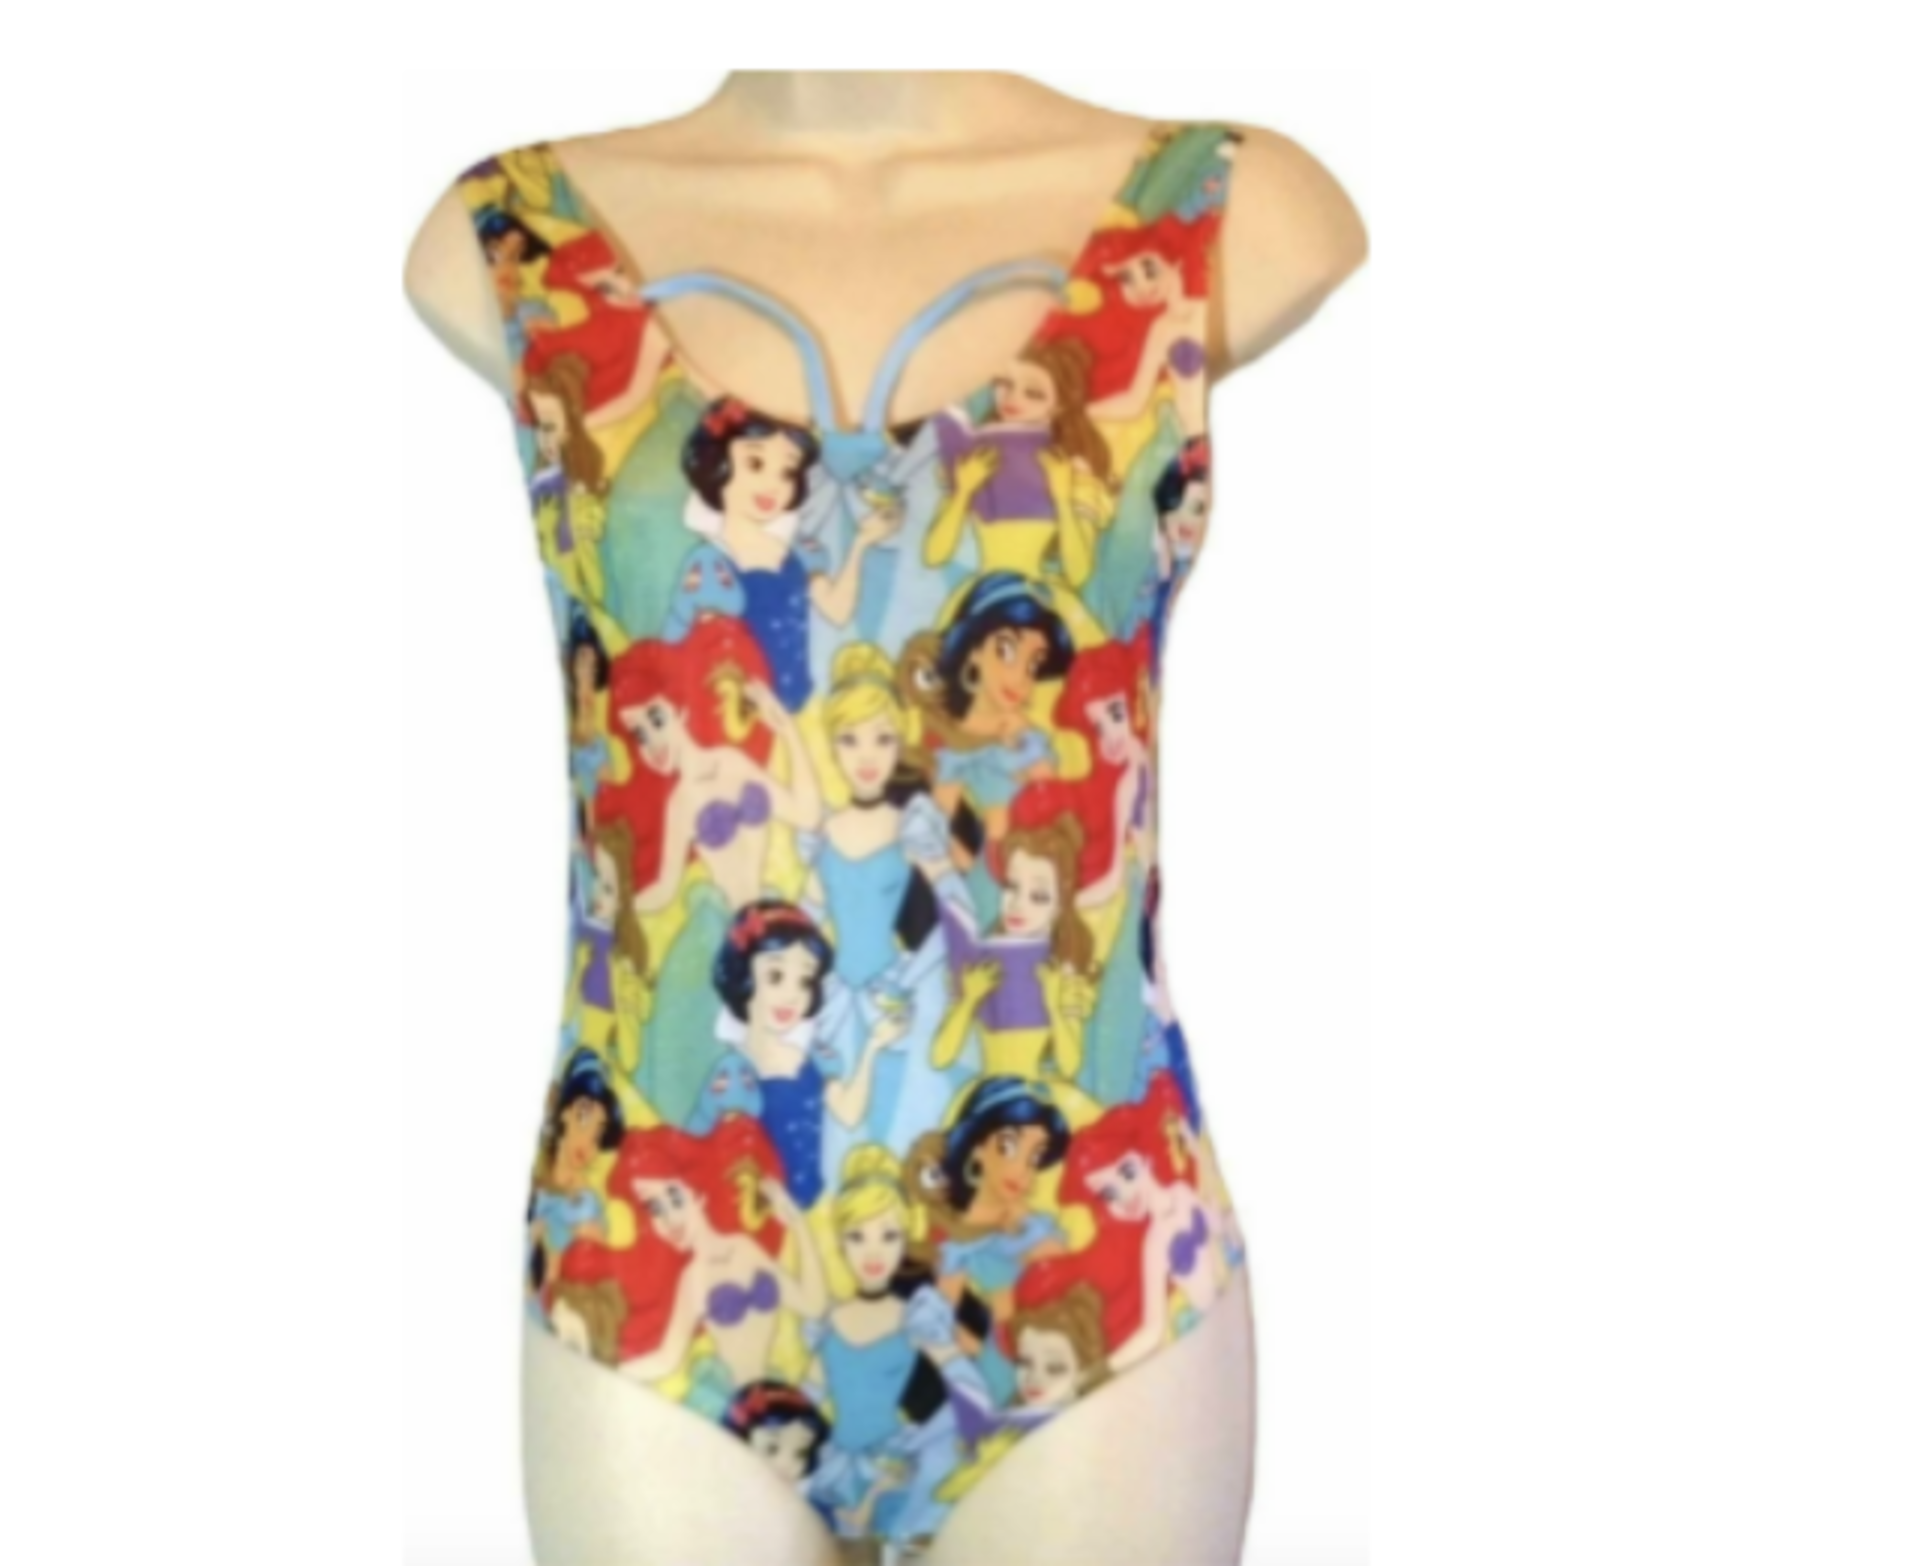 250 DISNEY'S PRINCESS TEEN GIRLS BODYSUIT, VARIOUS SIZES, NEW WITH TAGS - Image 2 of 7